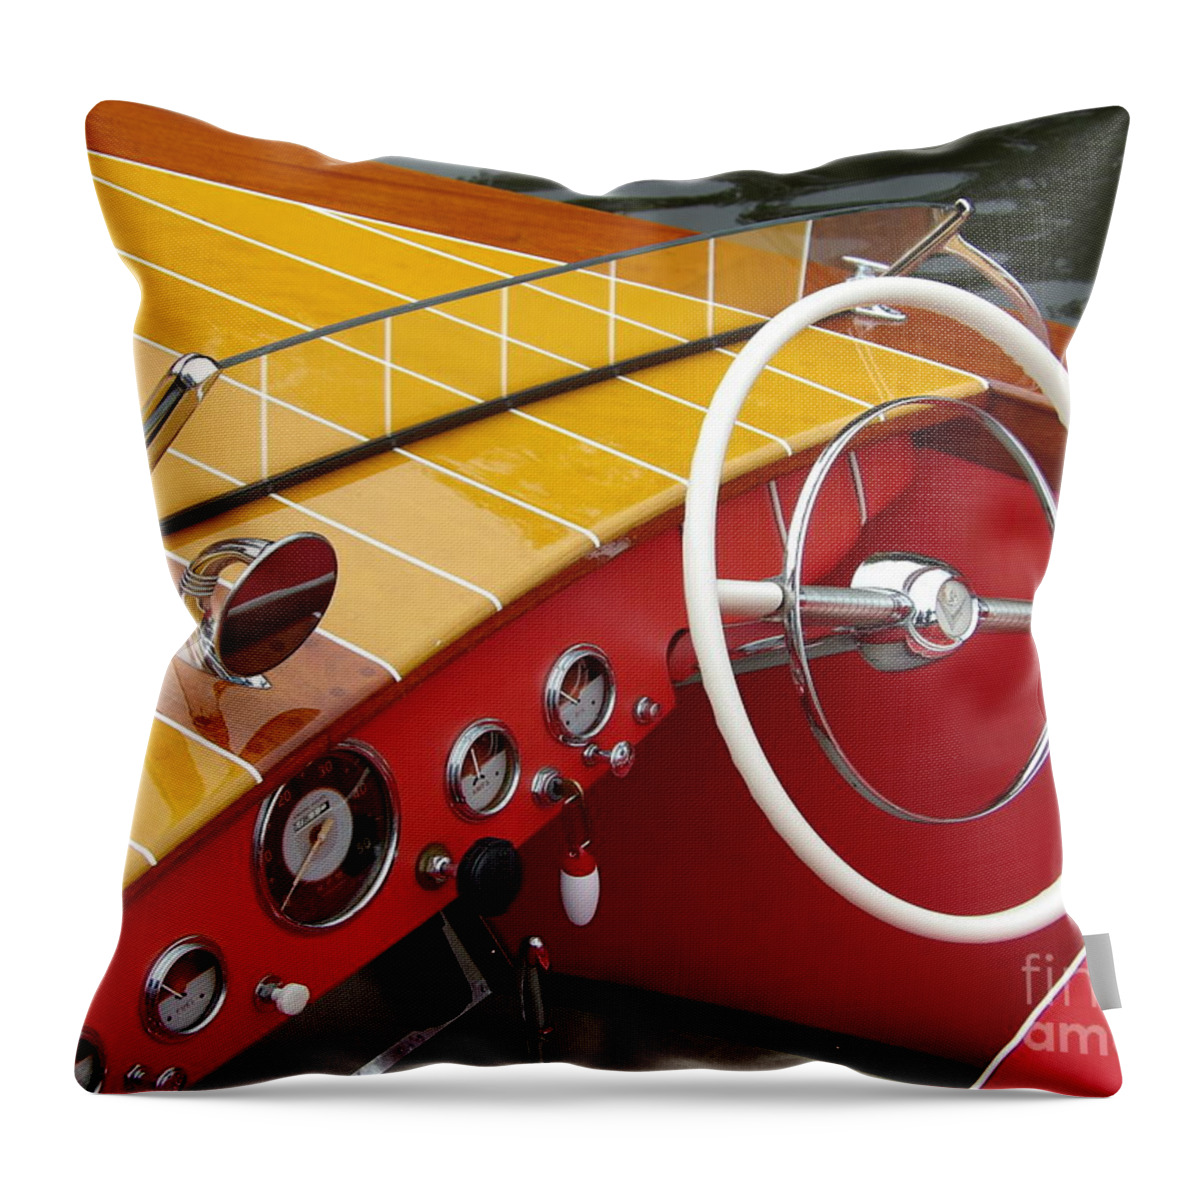 Boat Throw Pillow featuring the photograph Century Resorter by Neil Zimmerman